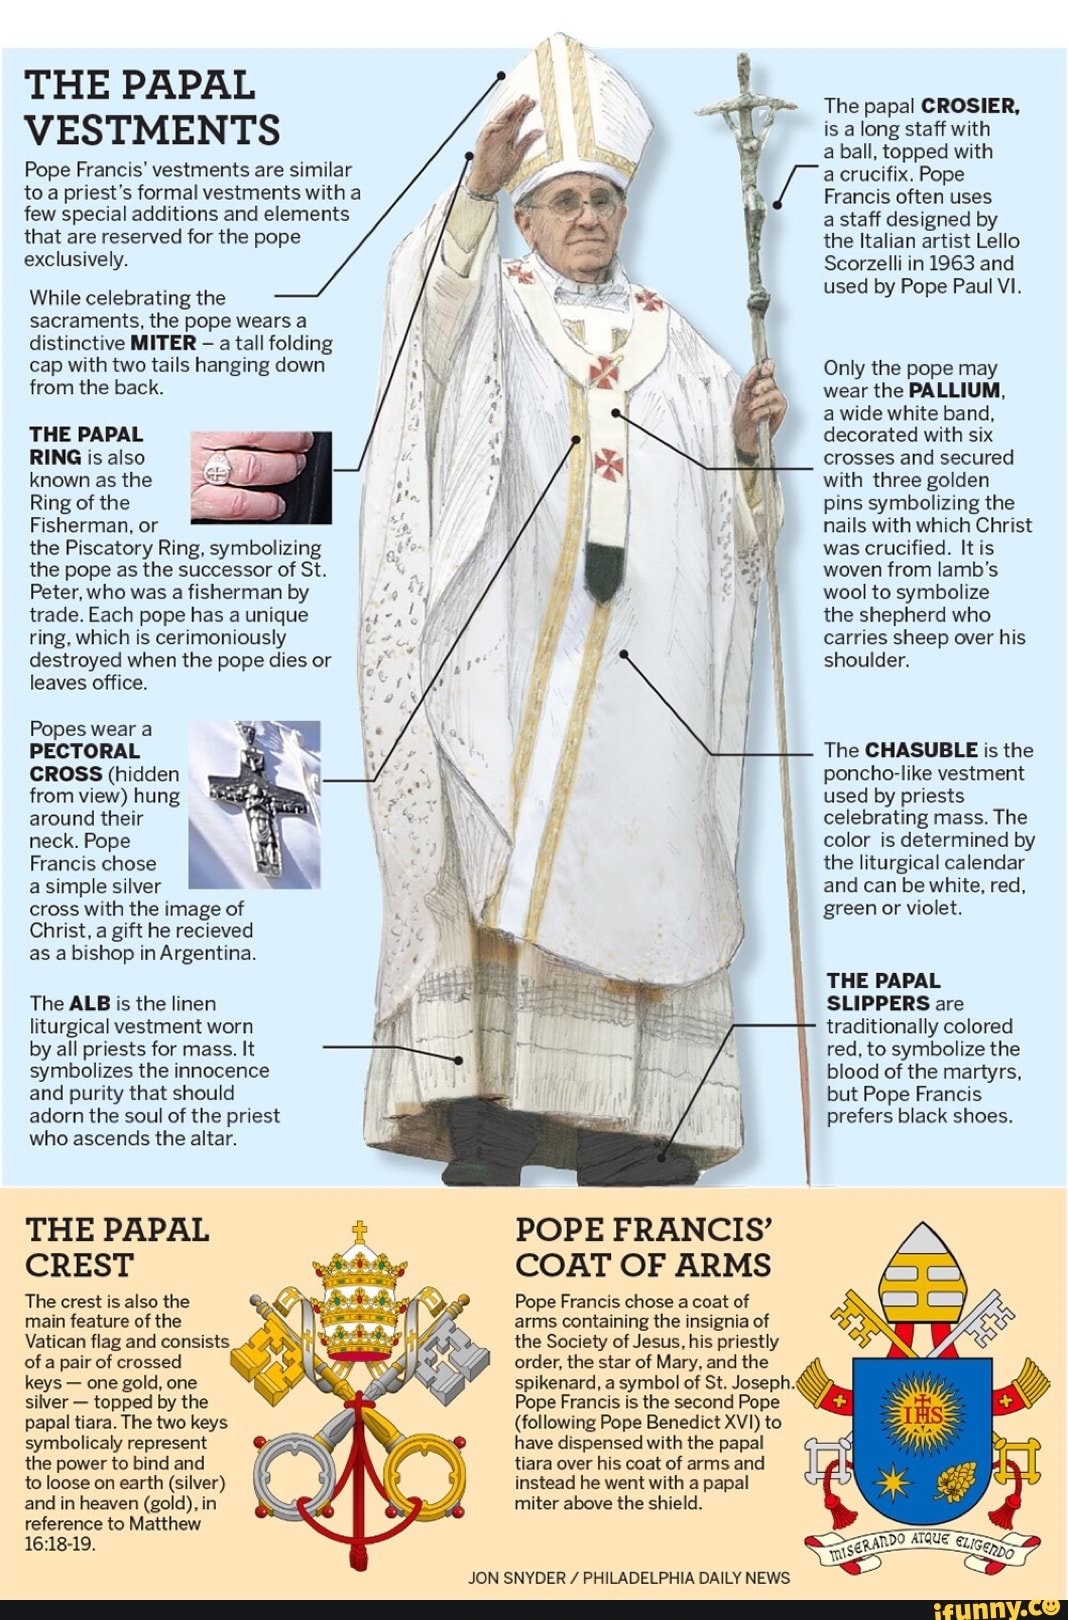 (following Pope Benedict XVI) to have dispensed with the papal miter ...